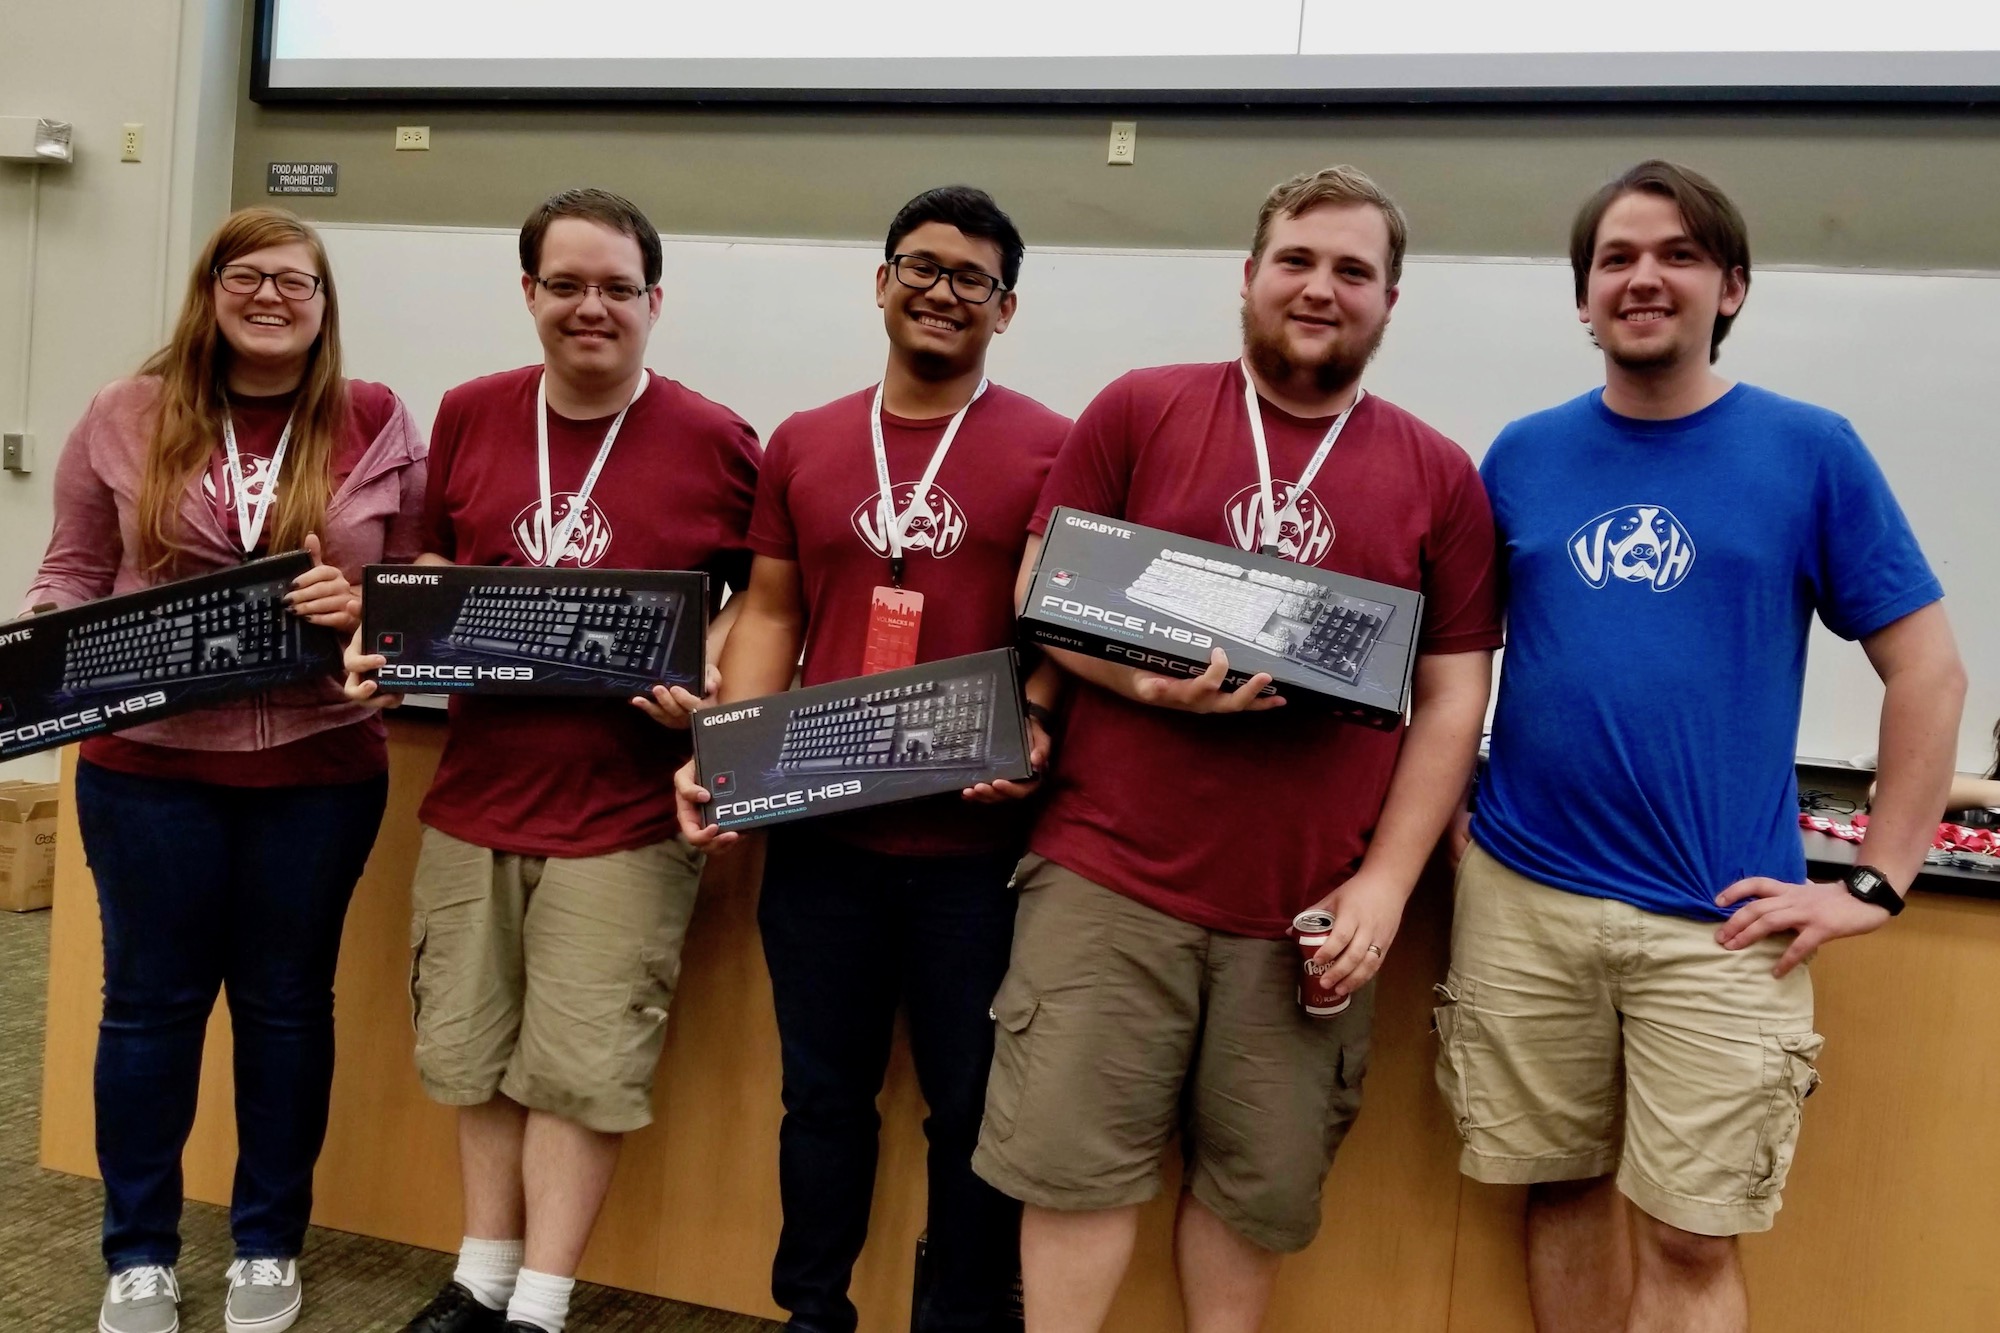 APSU's Team Red's Pi-Mail won “Most Technical Hack” and “Most Market Ready Hack.”